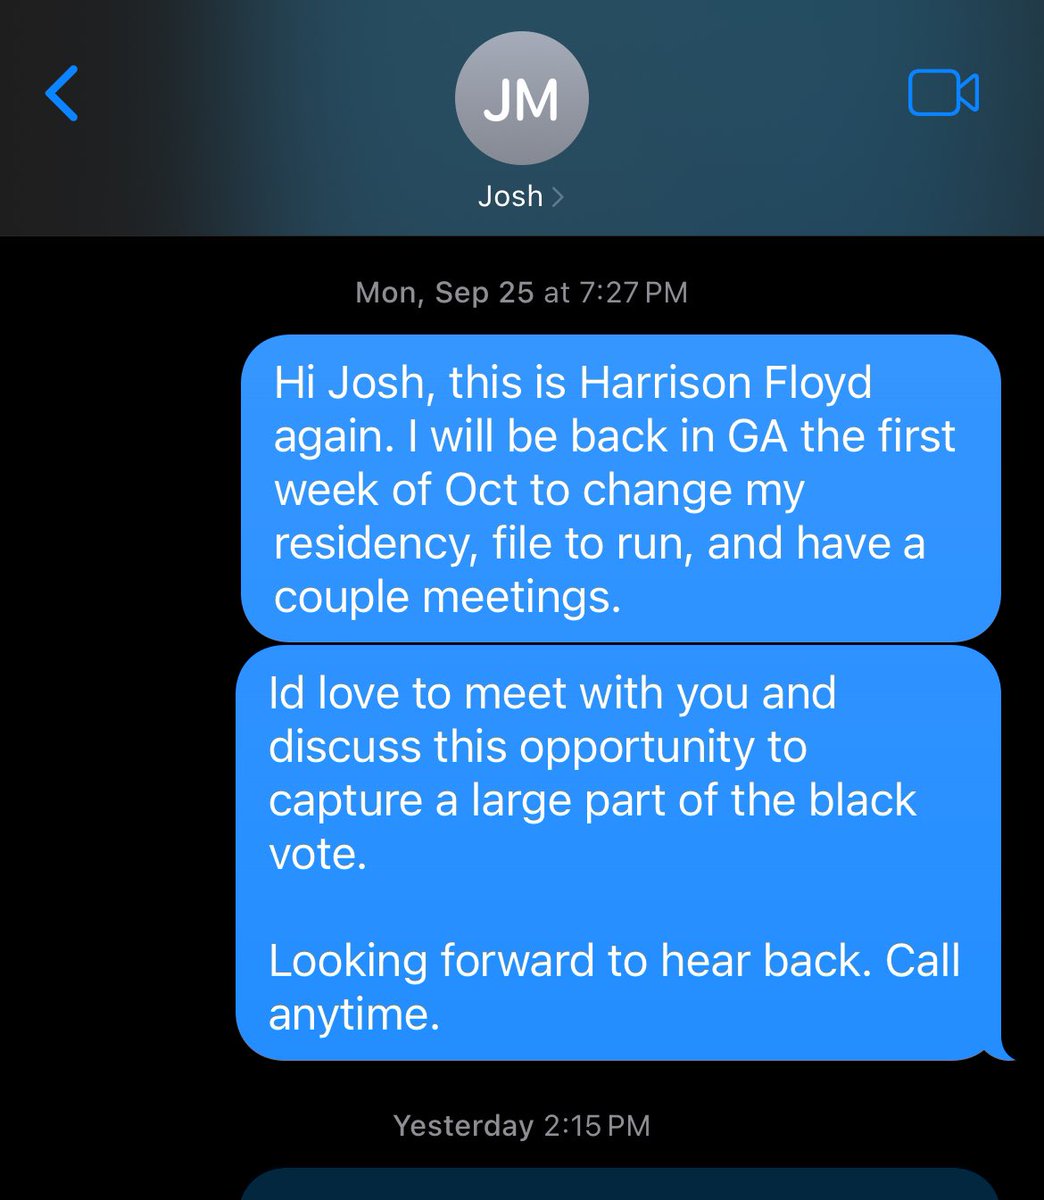 One would think. But I still havent heard from @JoshMcKoon and its not the first time. 7 months ago I offered to help with black outreach. I even hosted a virtual round table with black leaders across the country for GA GOP leadership. Josh didn’t show up at the last minute…